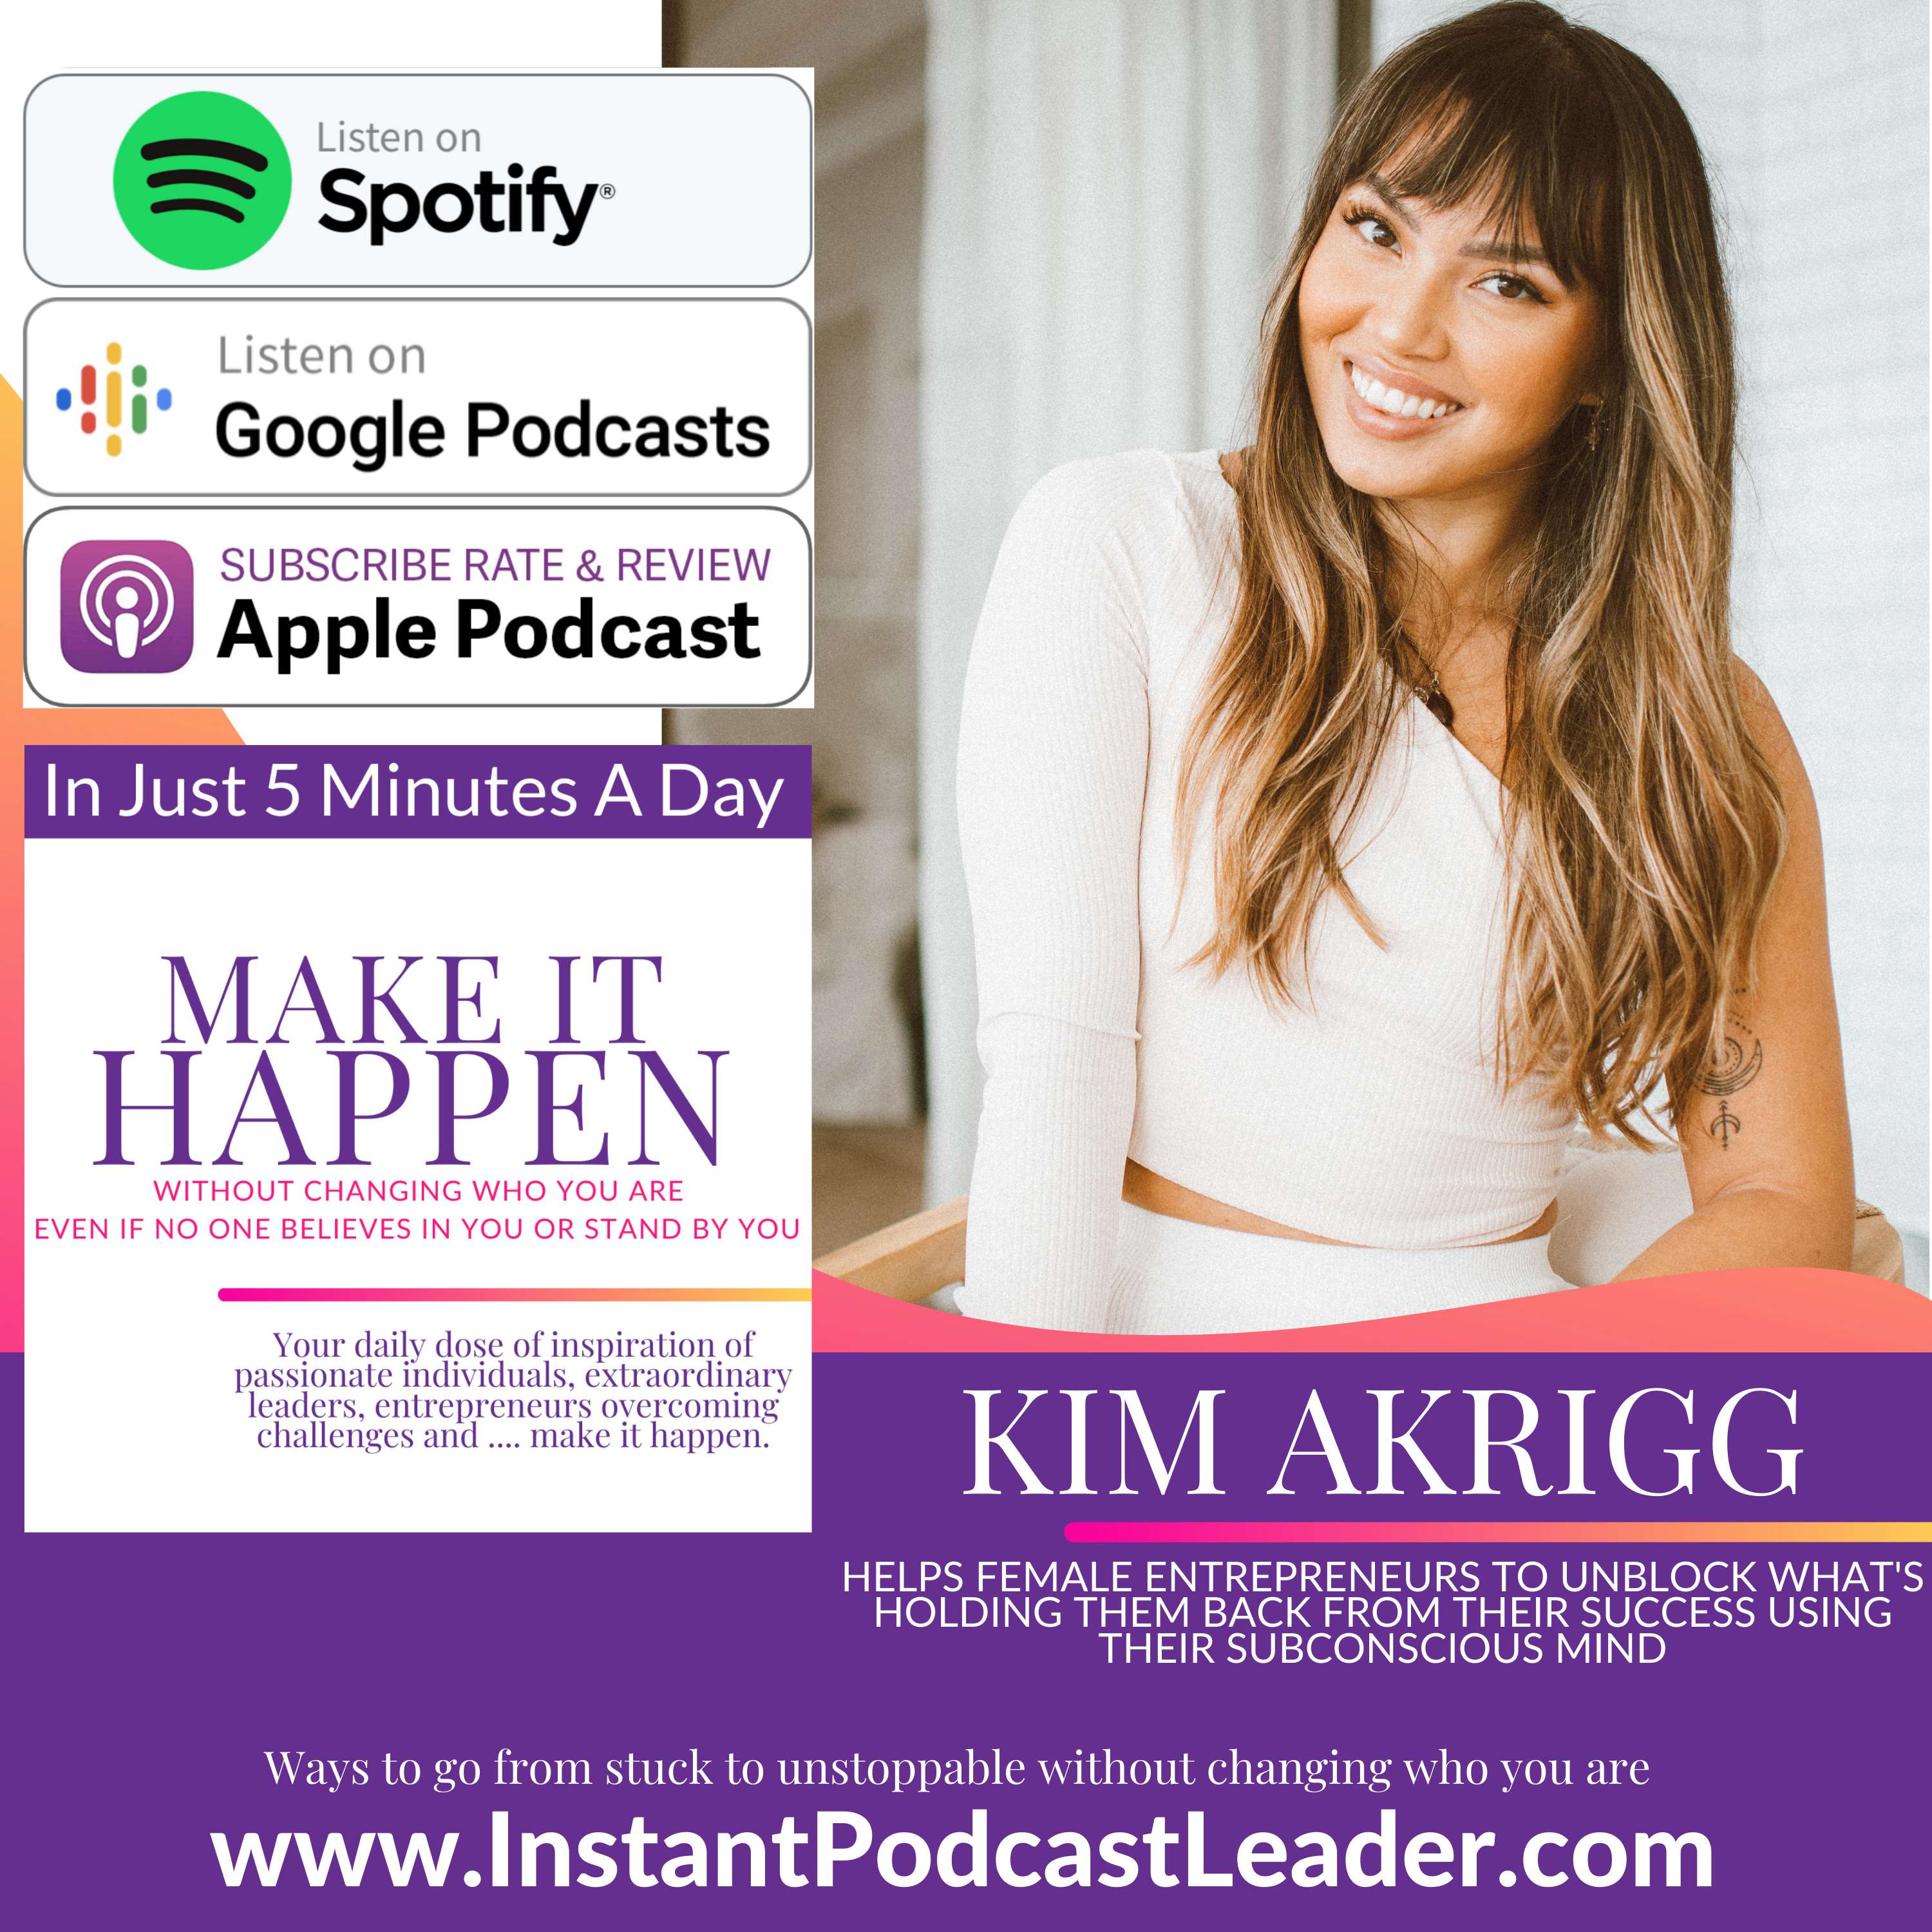 MIH EP49 Kim Akrigg Rapid helps female entrepreneurs to unblock what's holding them back from their success using their subconscious mind